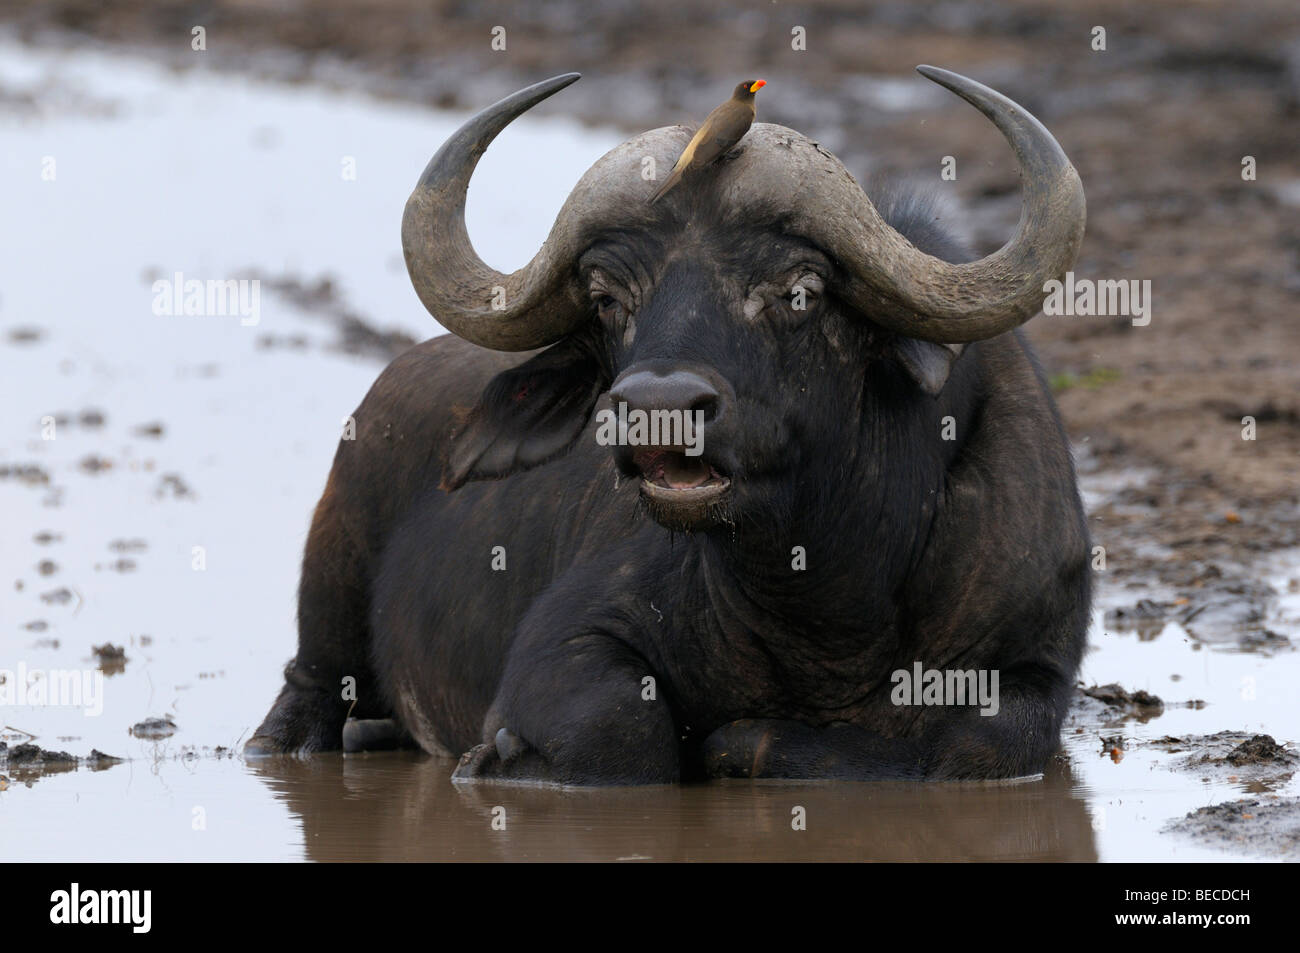 African Buffalo (Syncerus caffer), taking a cooling bath in a puddle, Masai Mara National Reserve, Kenya, East Africa Stock Photo